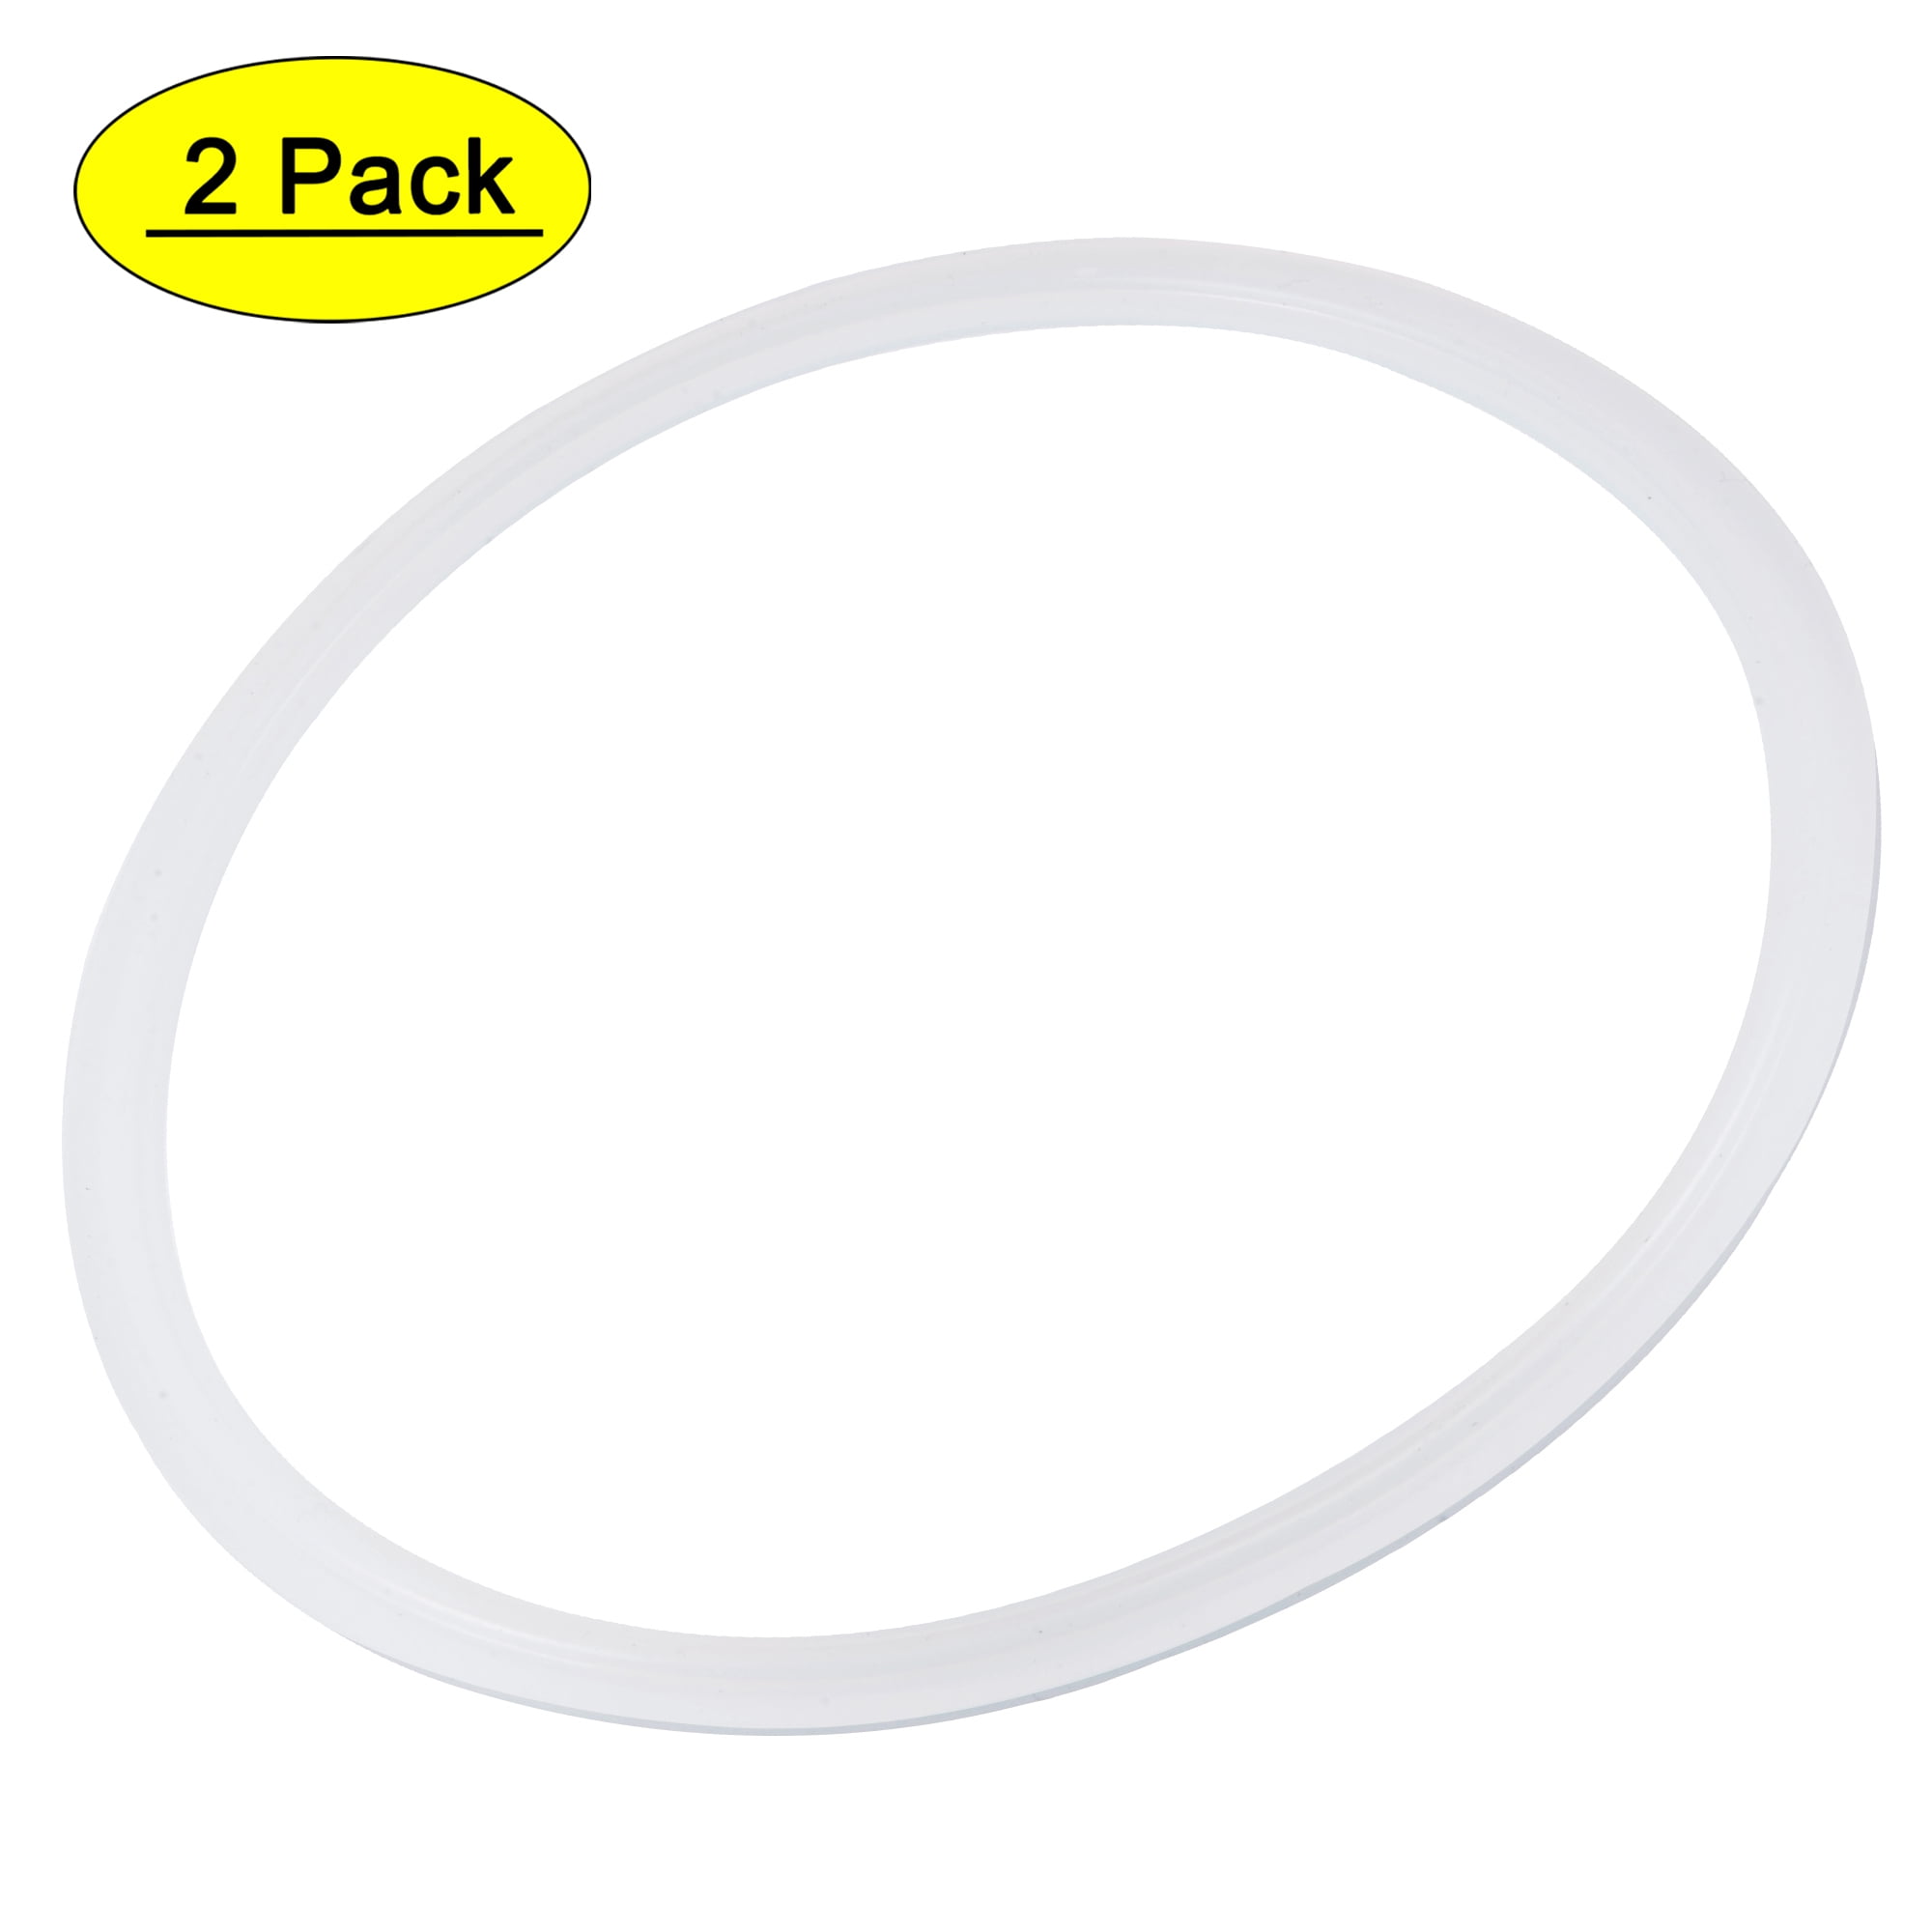 Silicone Rubber Gasket Flange O-Ring for 2.5 Inch Vacuum Clamp White Pack of 5 